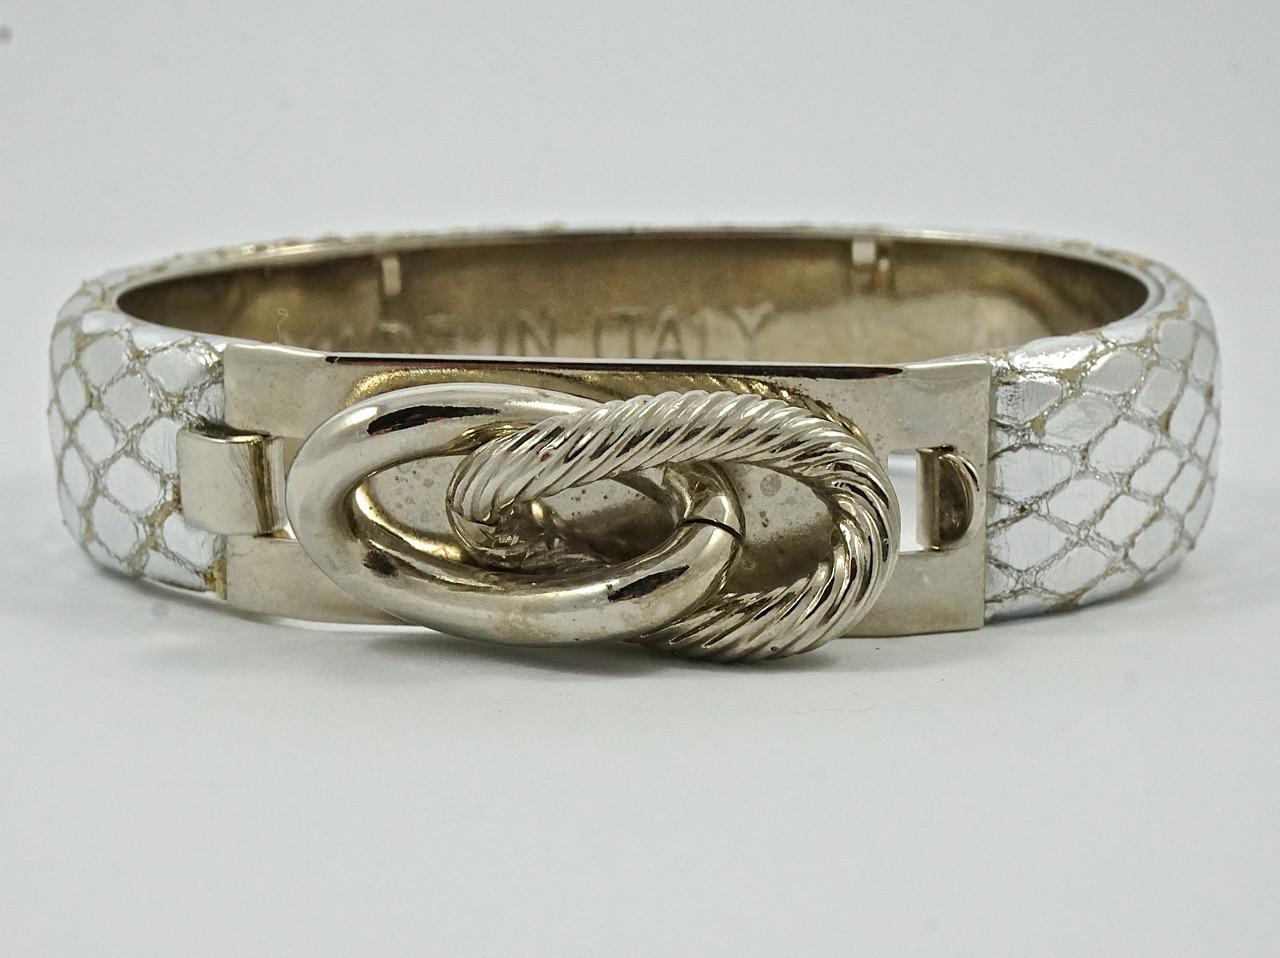 Wonderful leather lizard design bangle bracelets with decorative clasps, made in Italy. There is a silver leather bangle with silver tone metal, and a grey iridescent bangle with gold tone metal.  They both measure approximately inside diameter